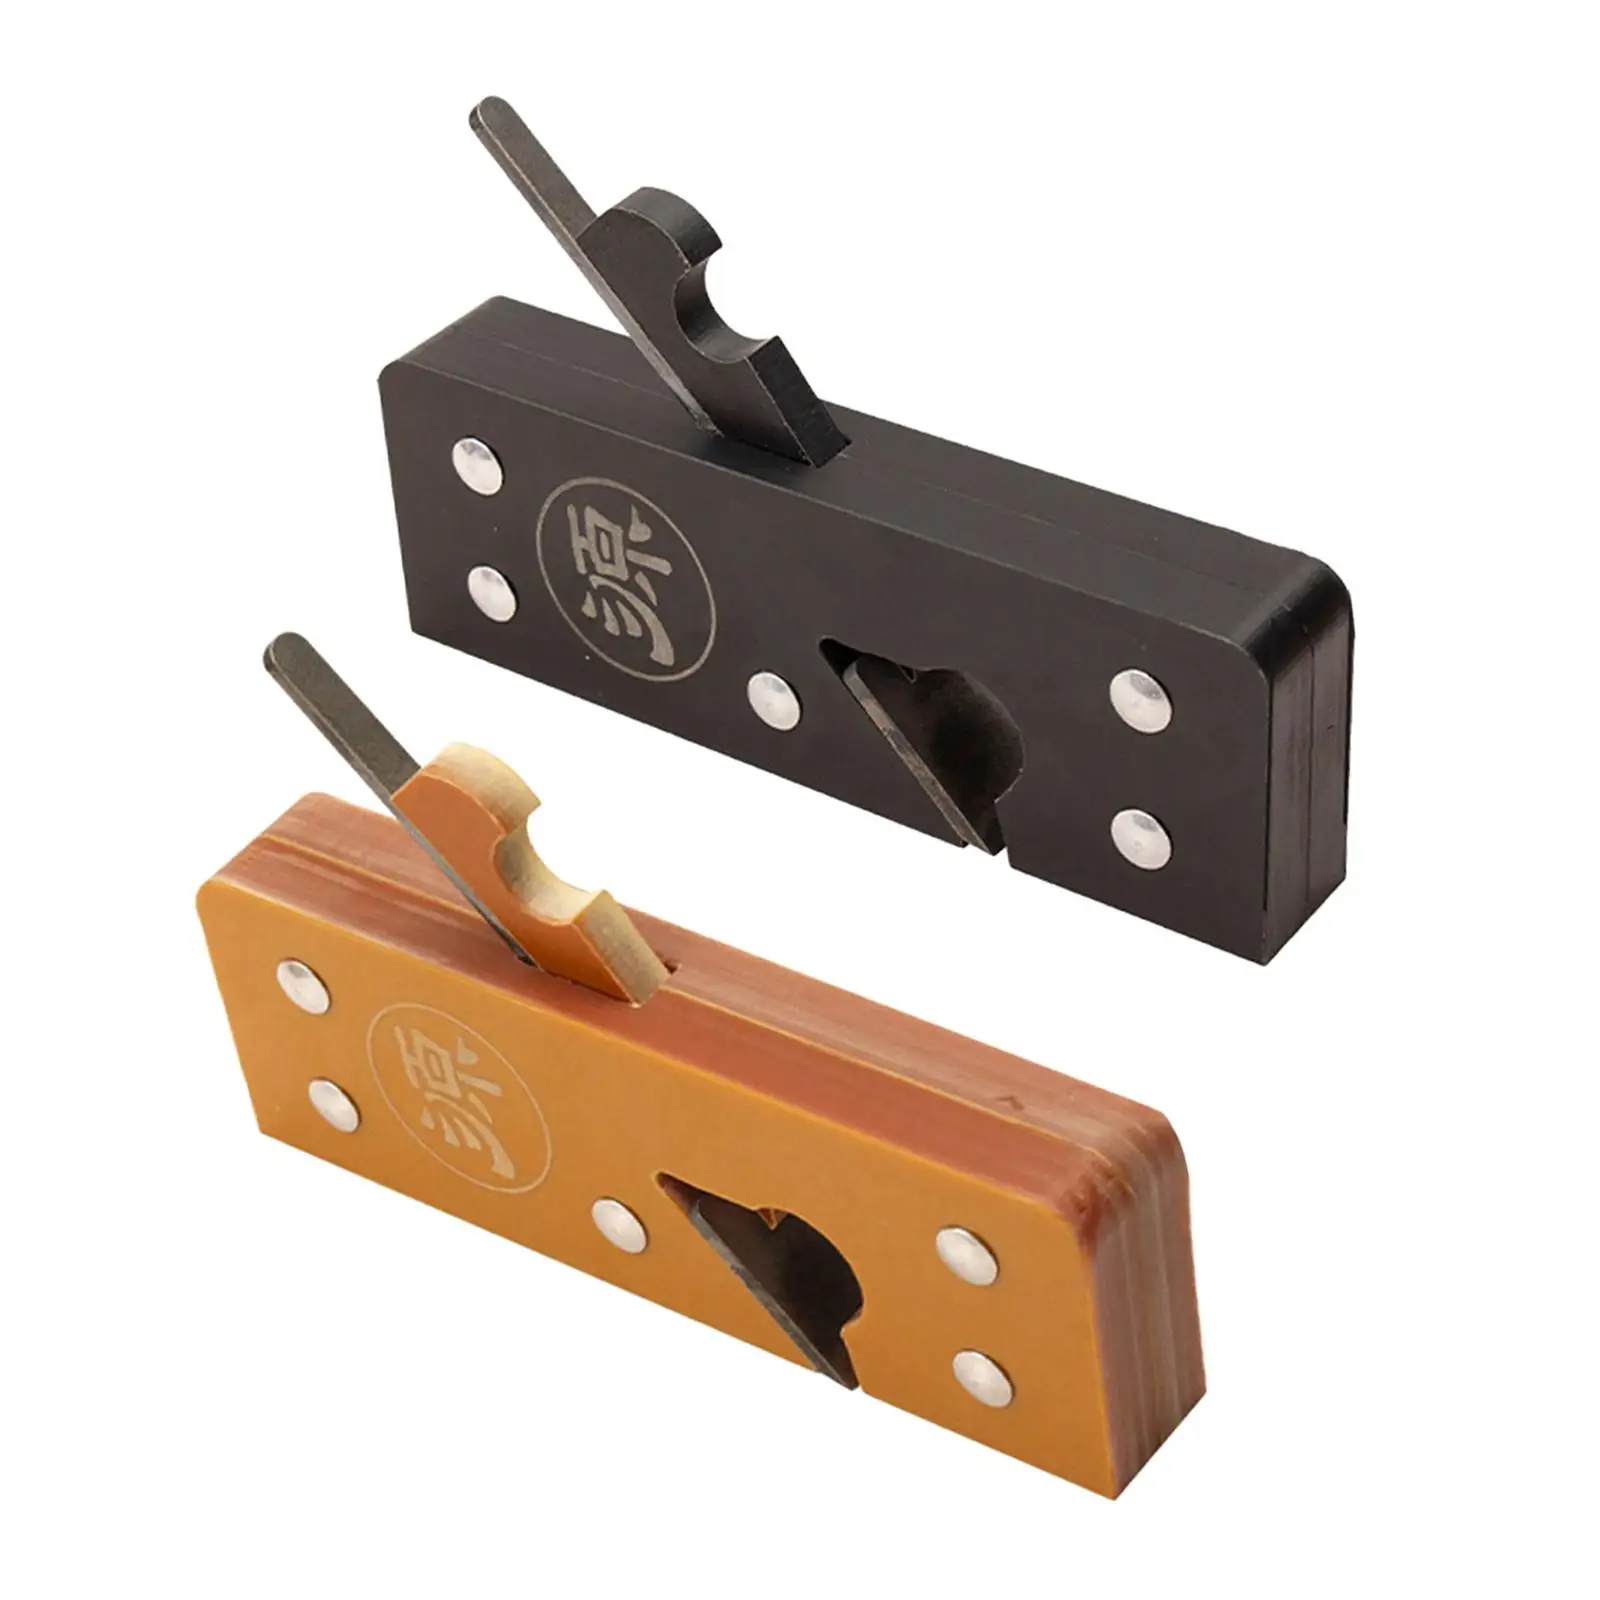 160mm Hand Planer Plane Trimming Door Planer Surface Smoothing Woodworking Planes Portable Hand Plane for Polishing Edges